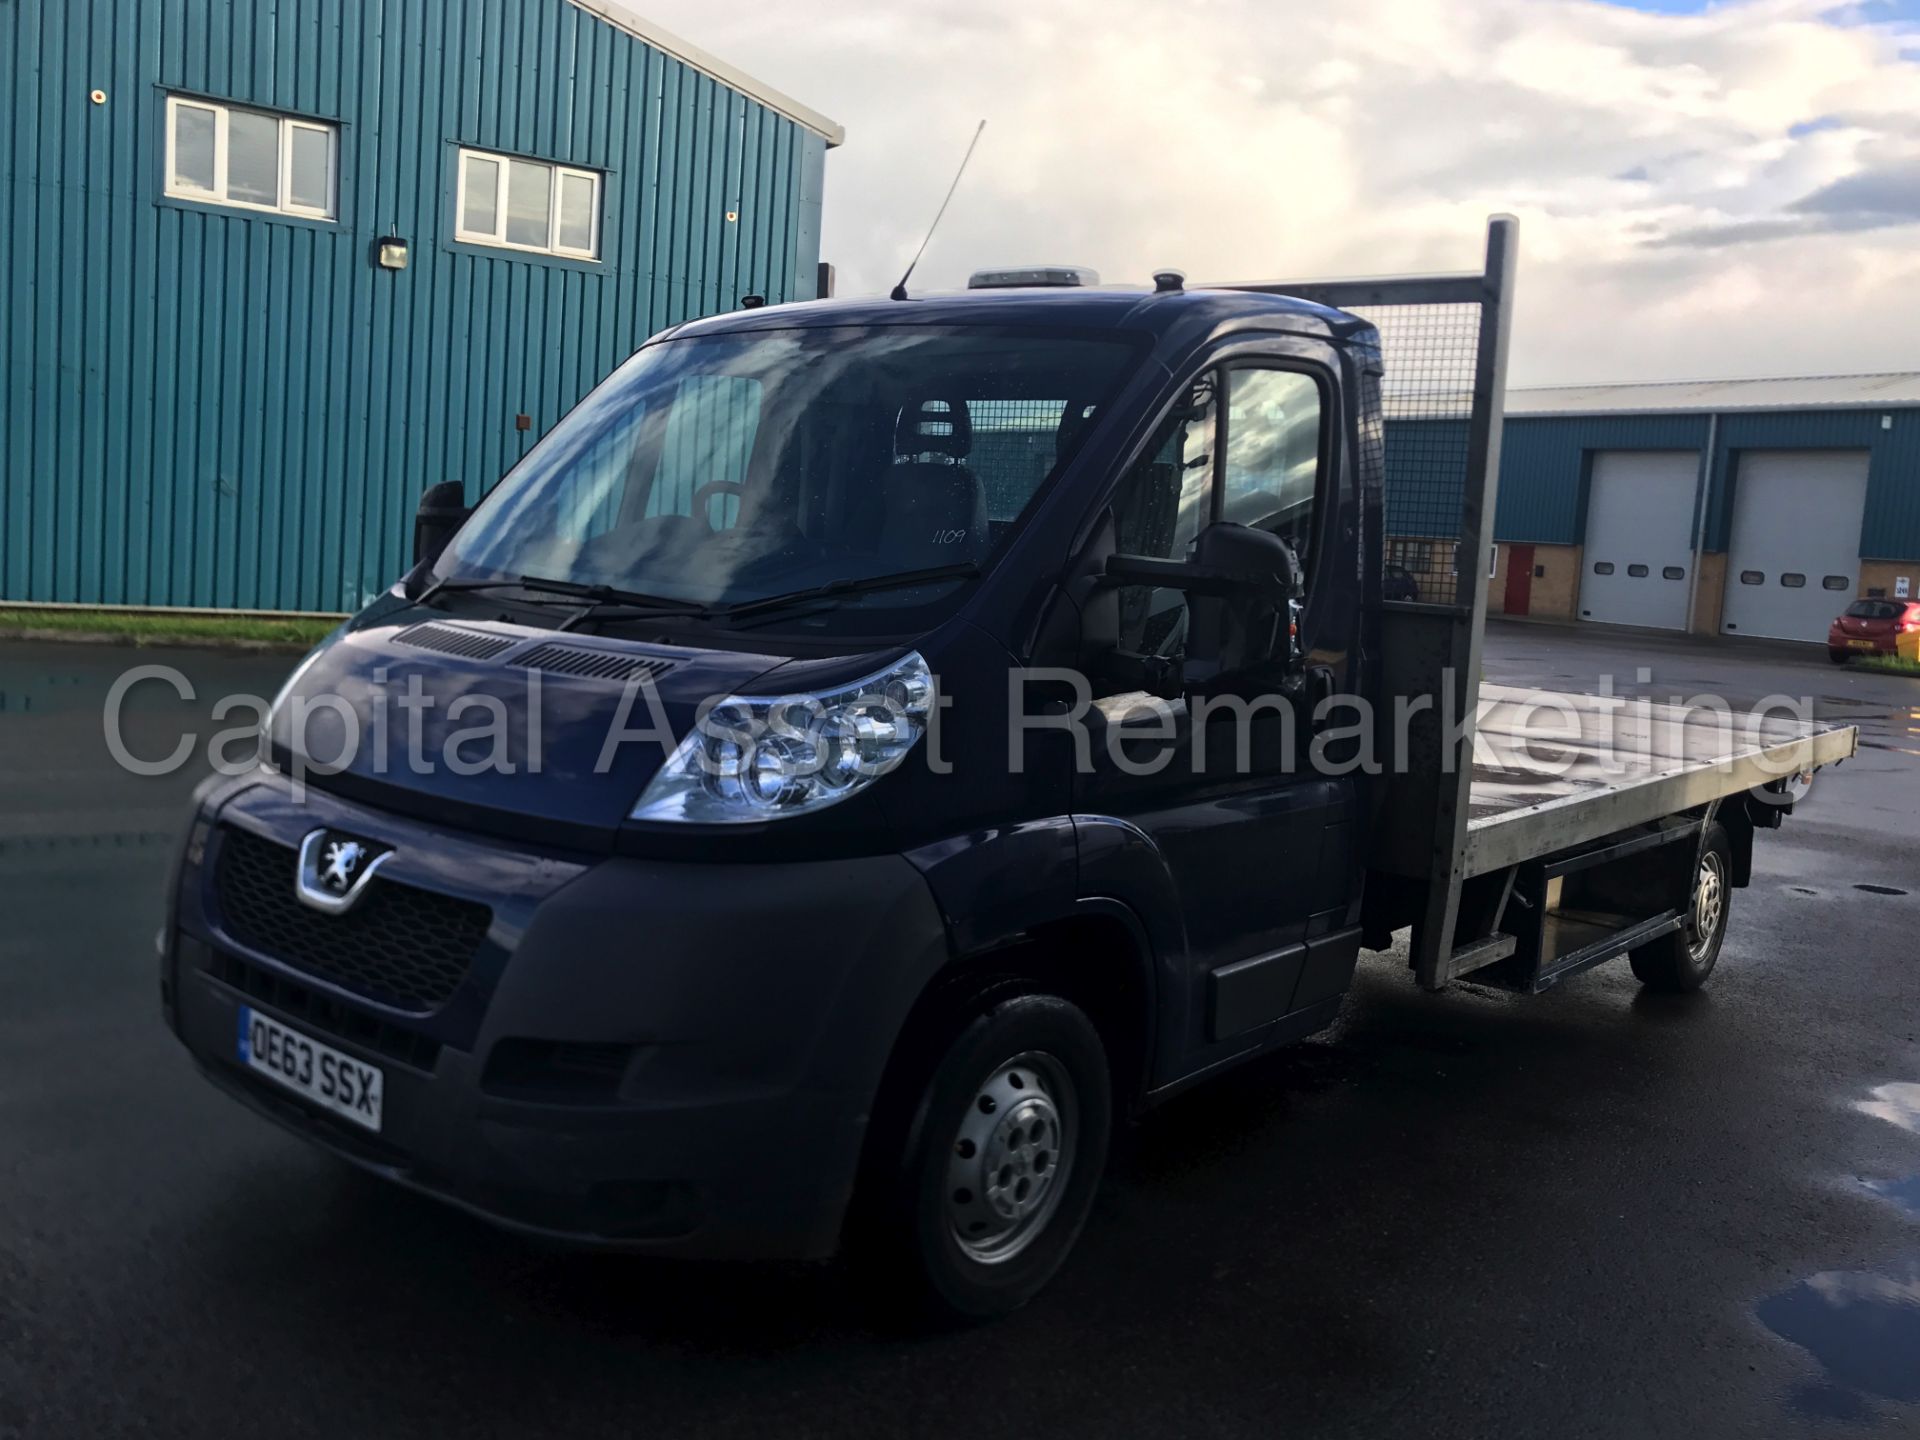 PEUGEOT BOXER 'L3 LWB - 13 FT FLATBED' (2014 MODEL) 2.2 HDI - 130 BHP - 6 SPEED' (1 COMPANY OWNER)